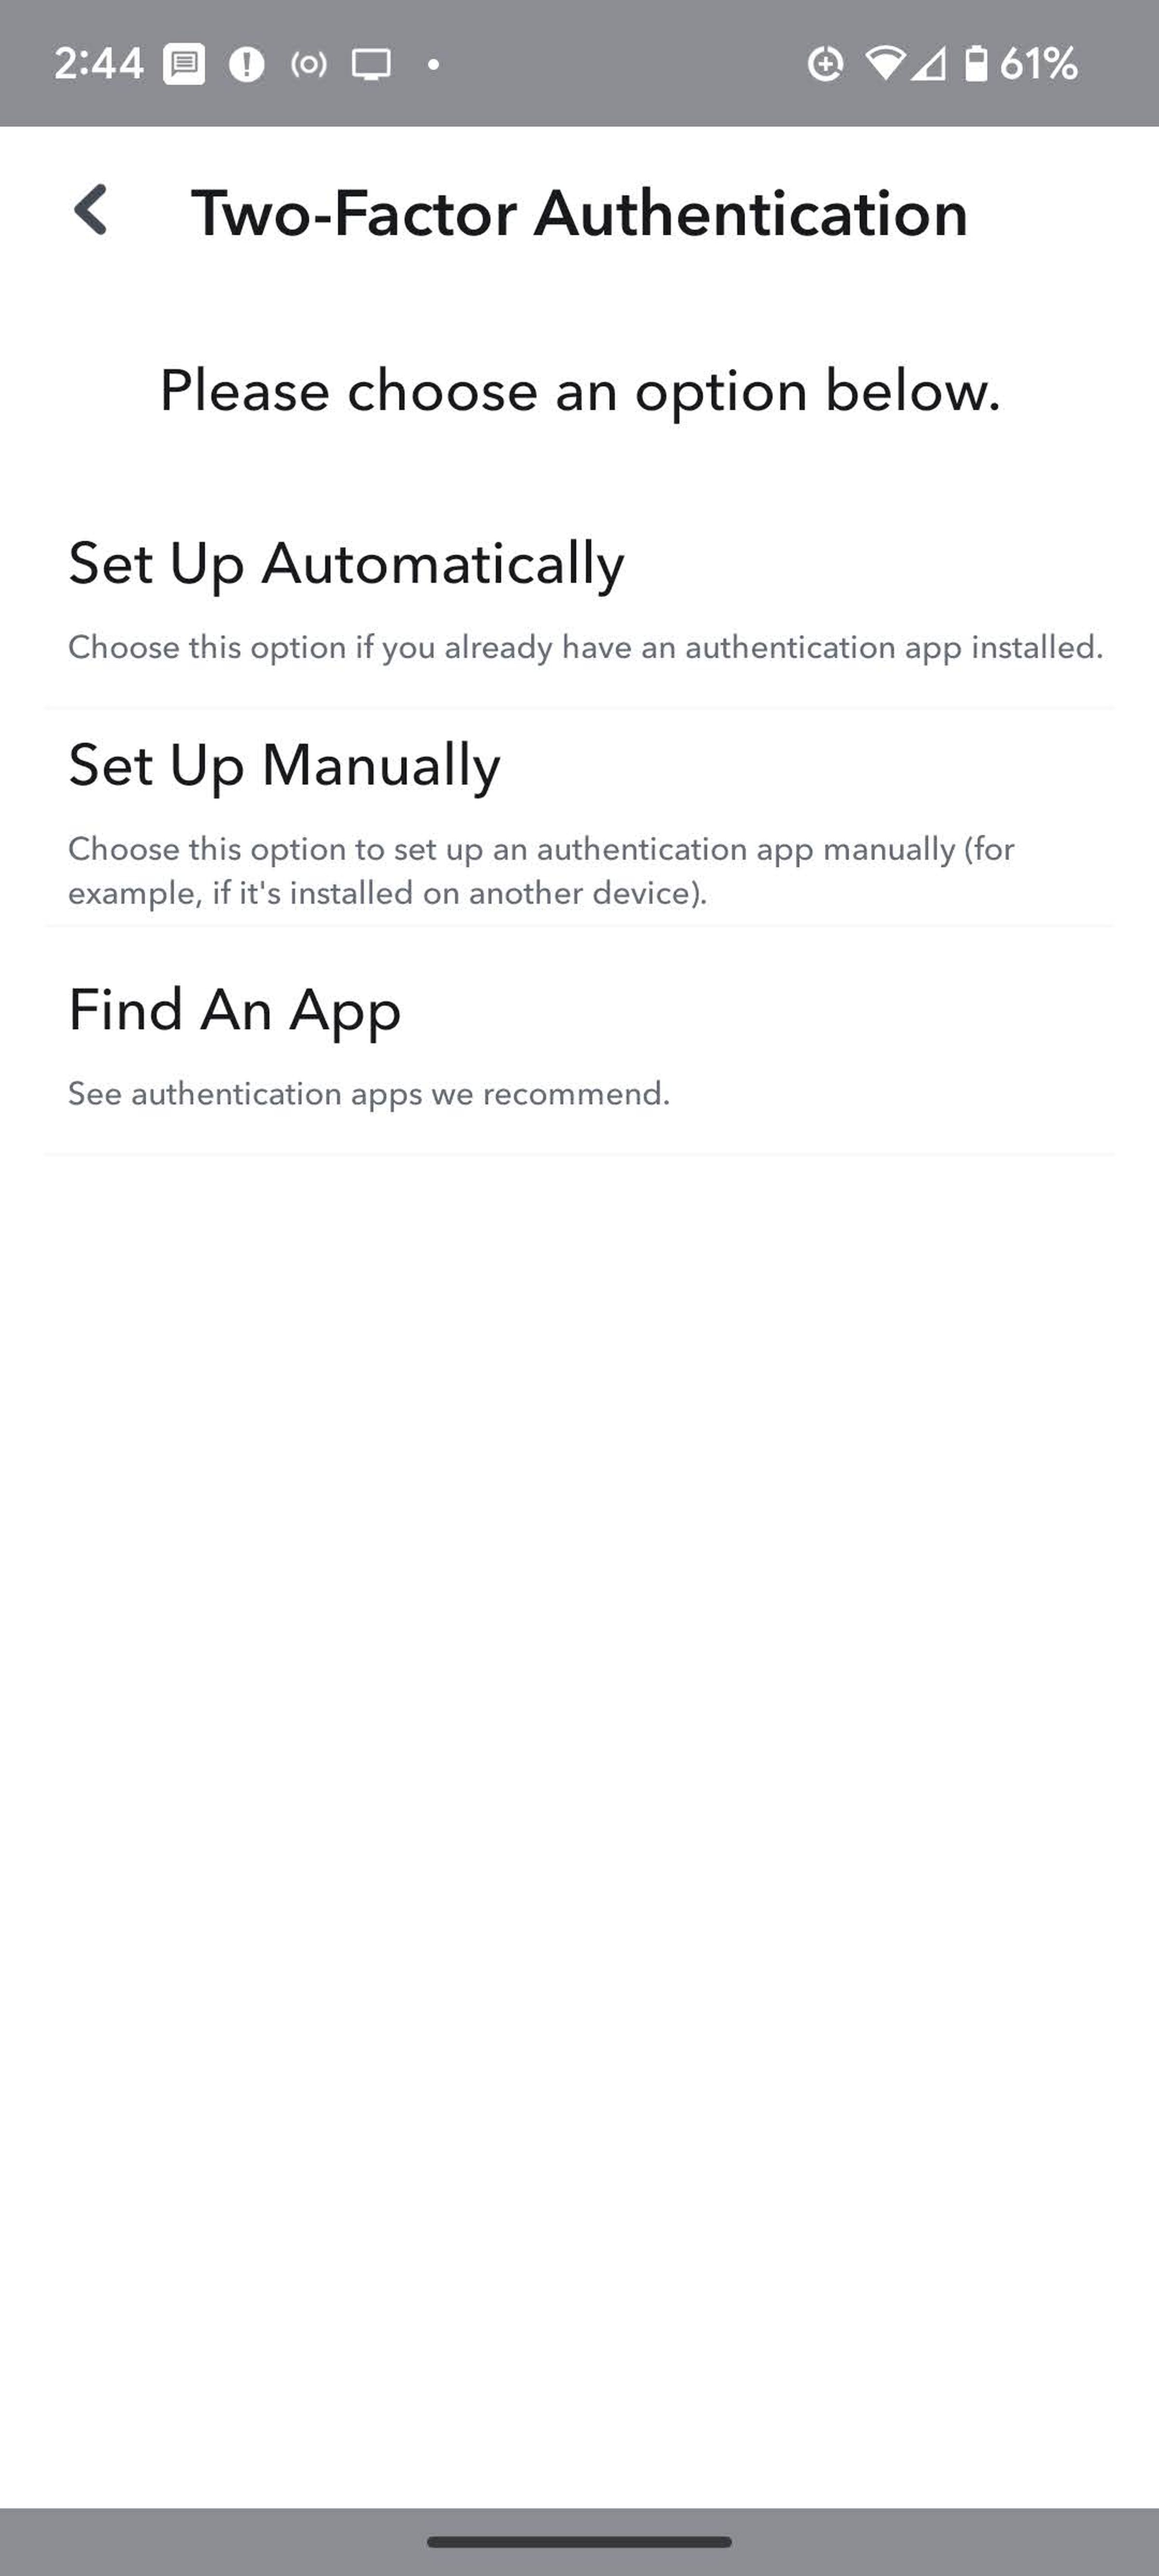 Snapchat page with Two-Factor Authentication on top, and text asking you to choose to set up automatically, set up manually, or find an app.